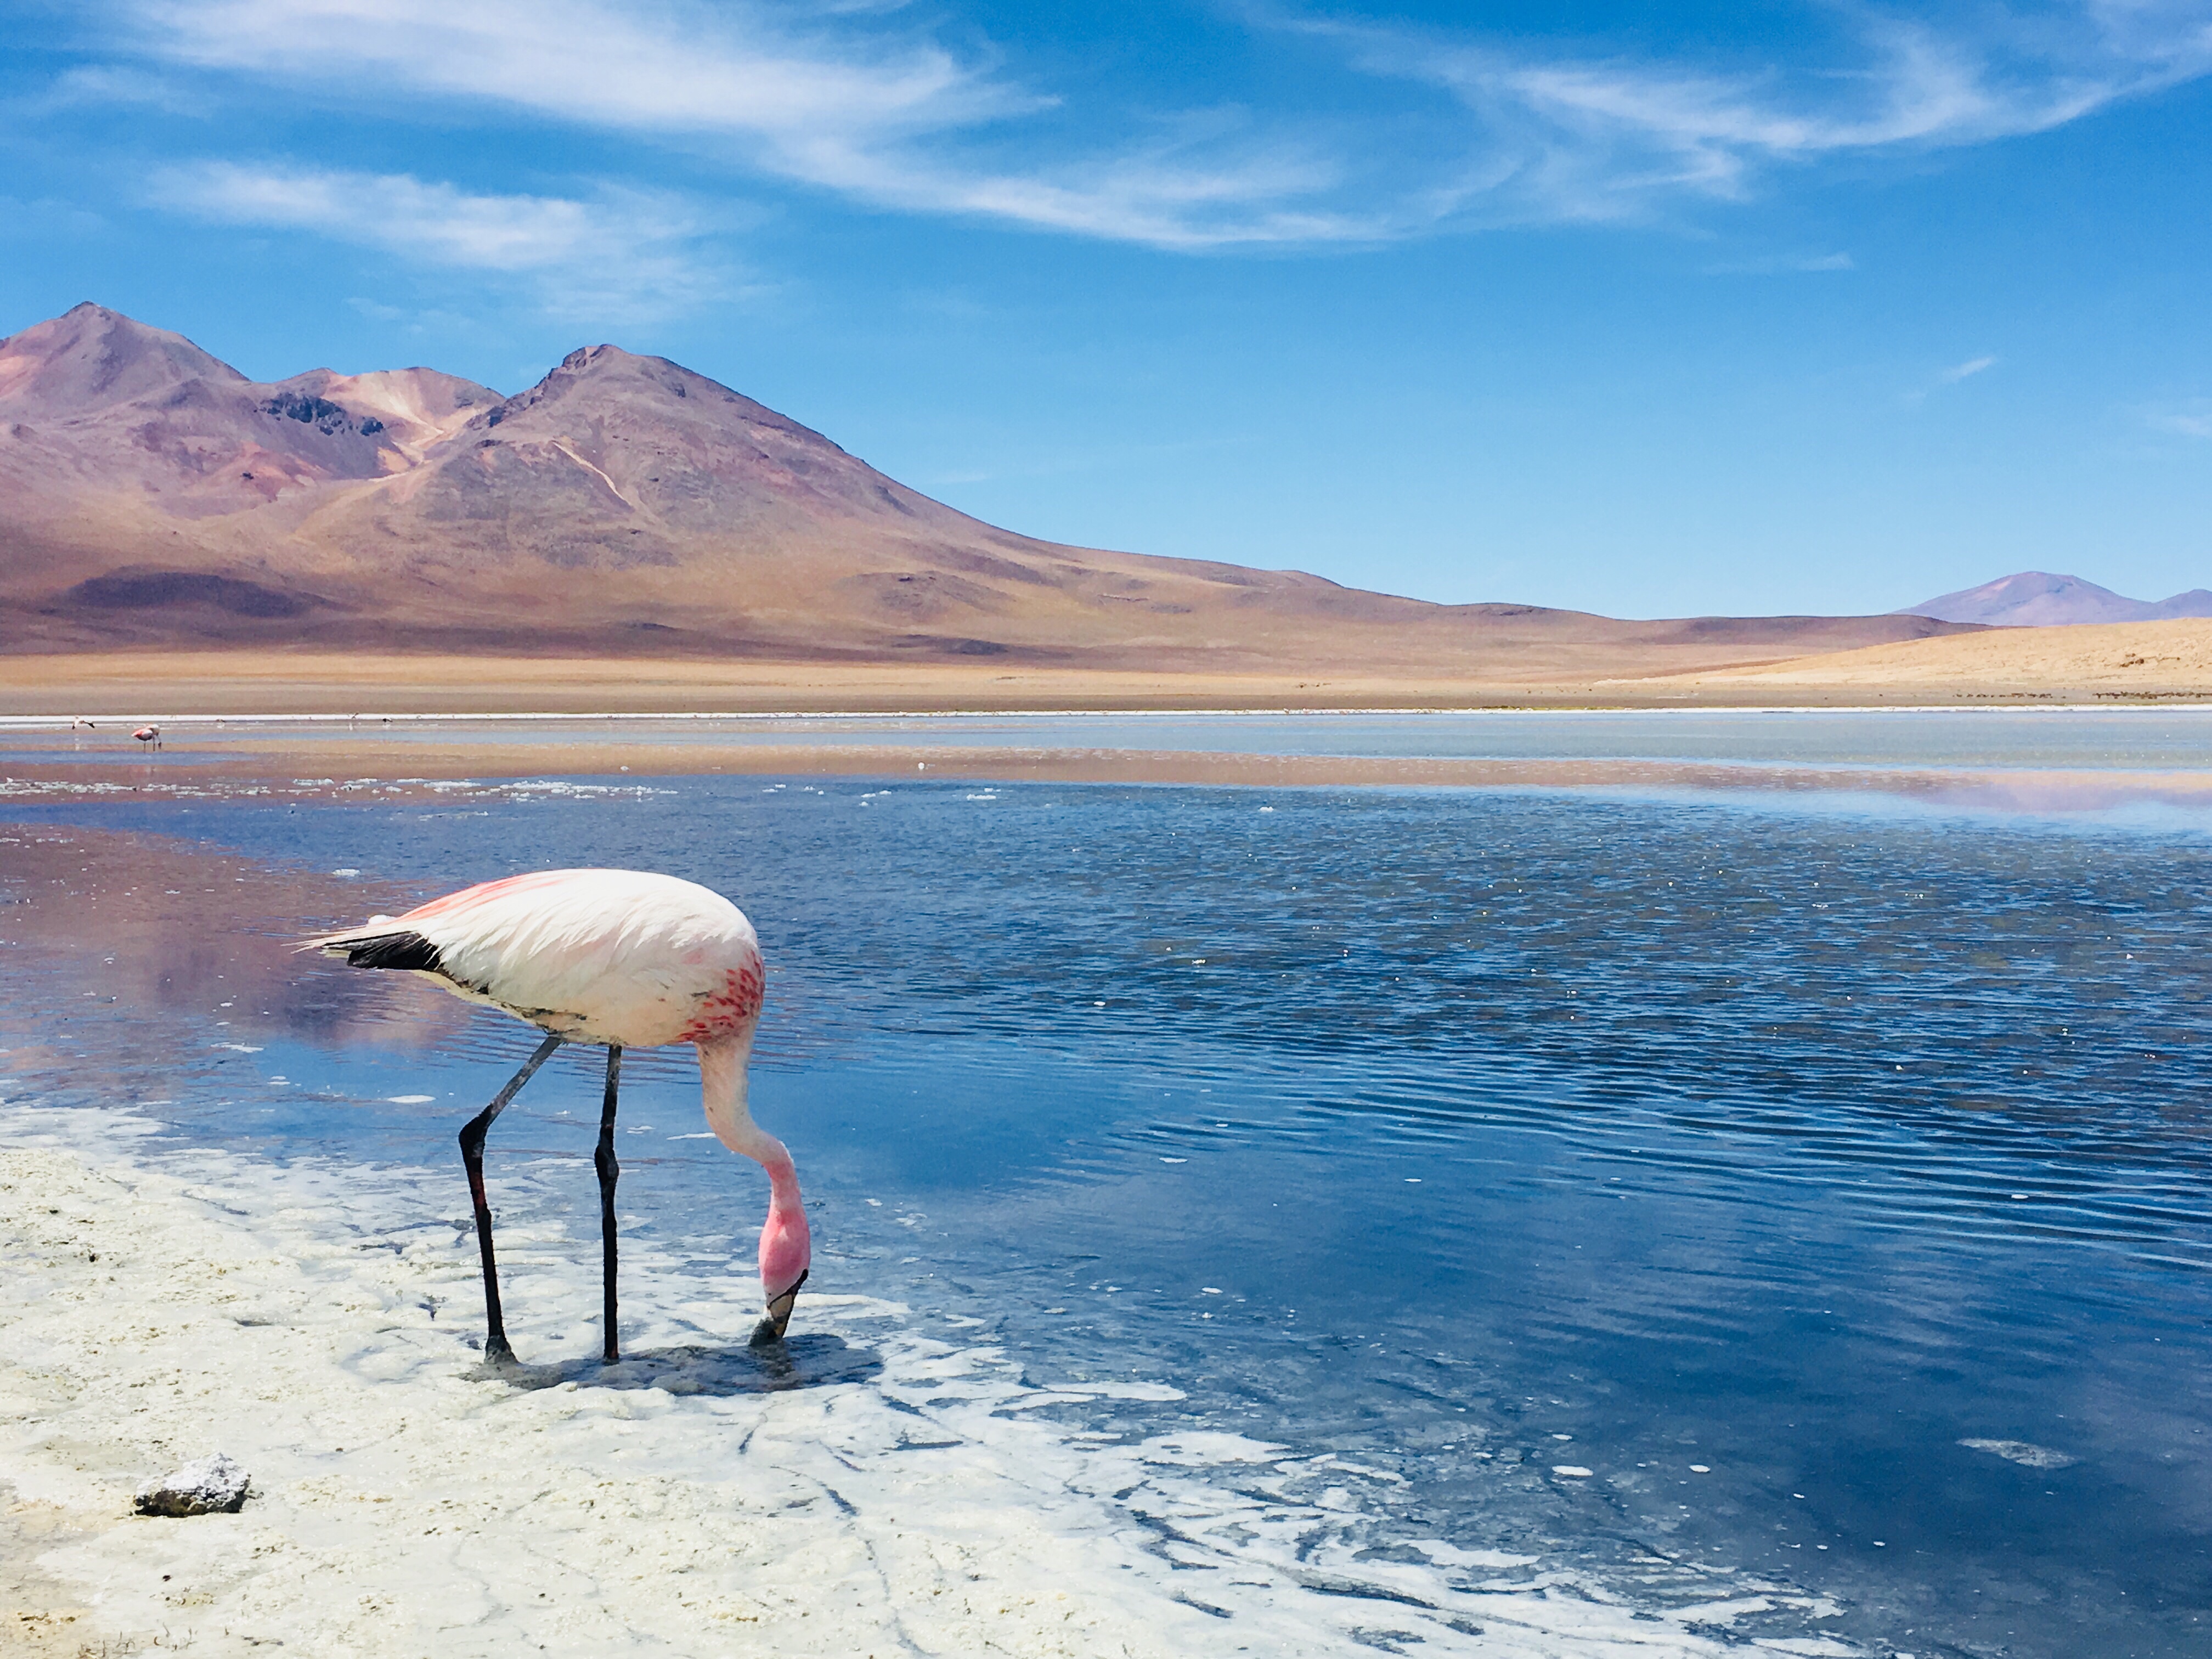 The 5 essentials tips you need to know before your trip to salar de uyuni (Flamingo)